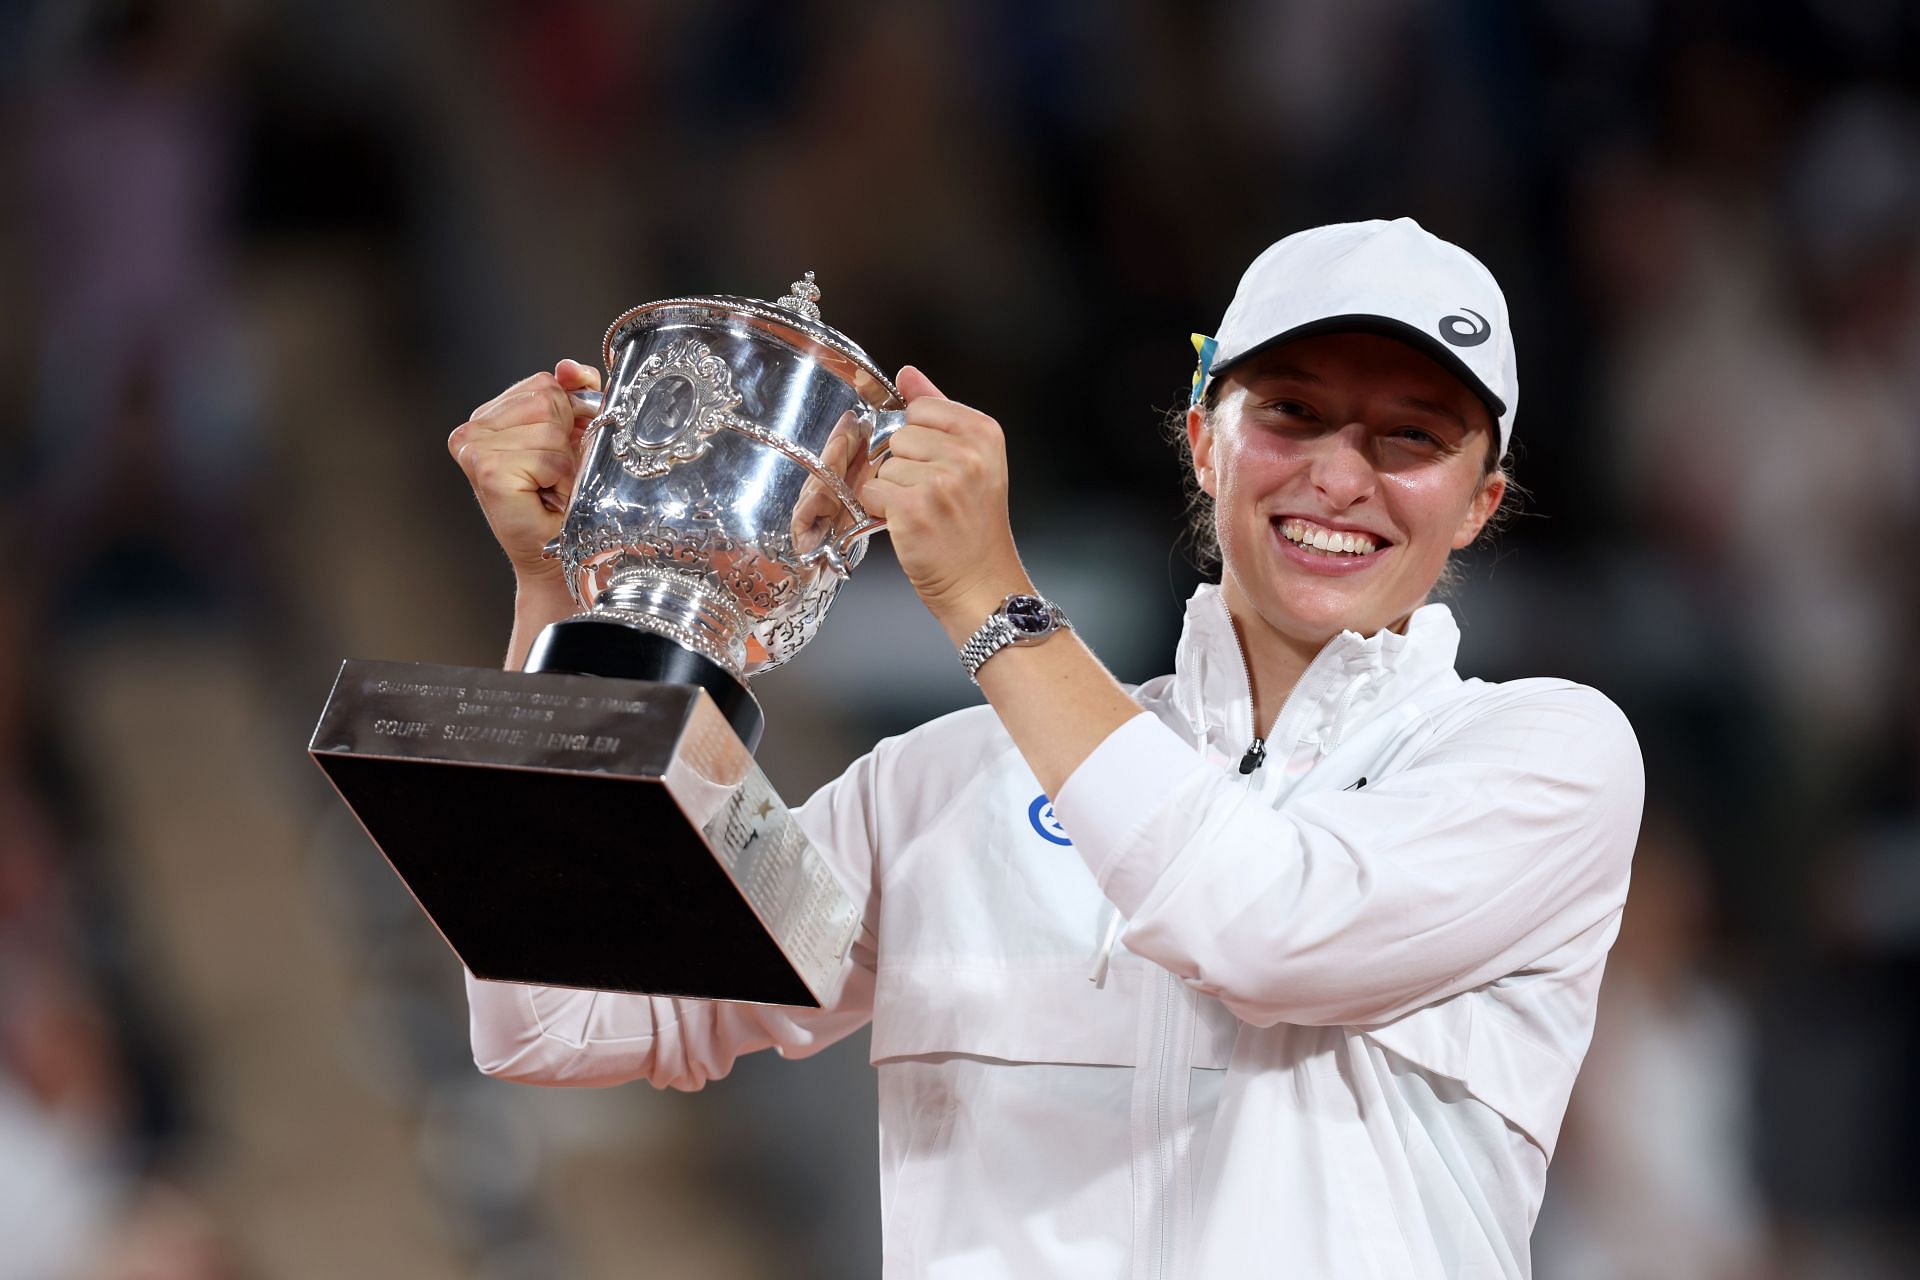 Iga Swiatek poses with the 2022 French Open trophy